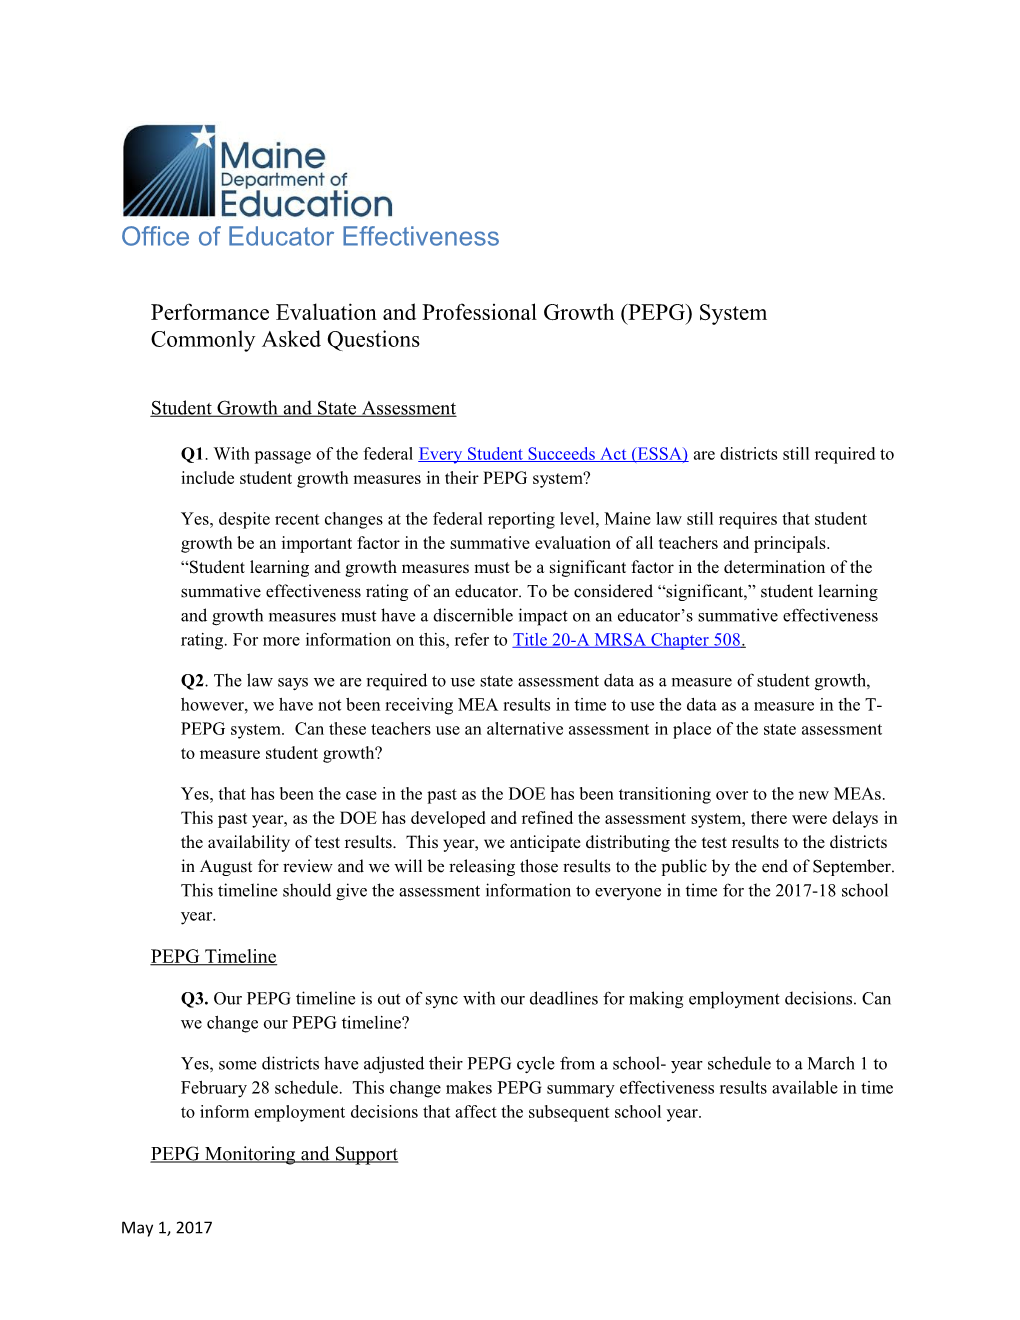 Performance Evaluation and Professional Growth (PEPG) System